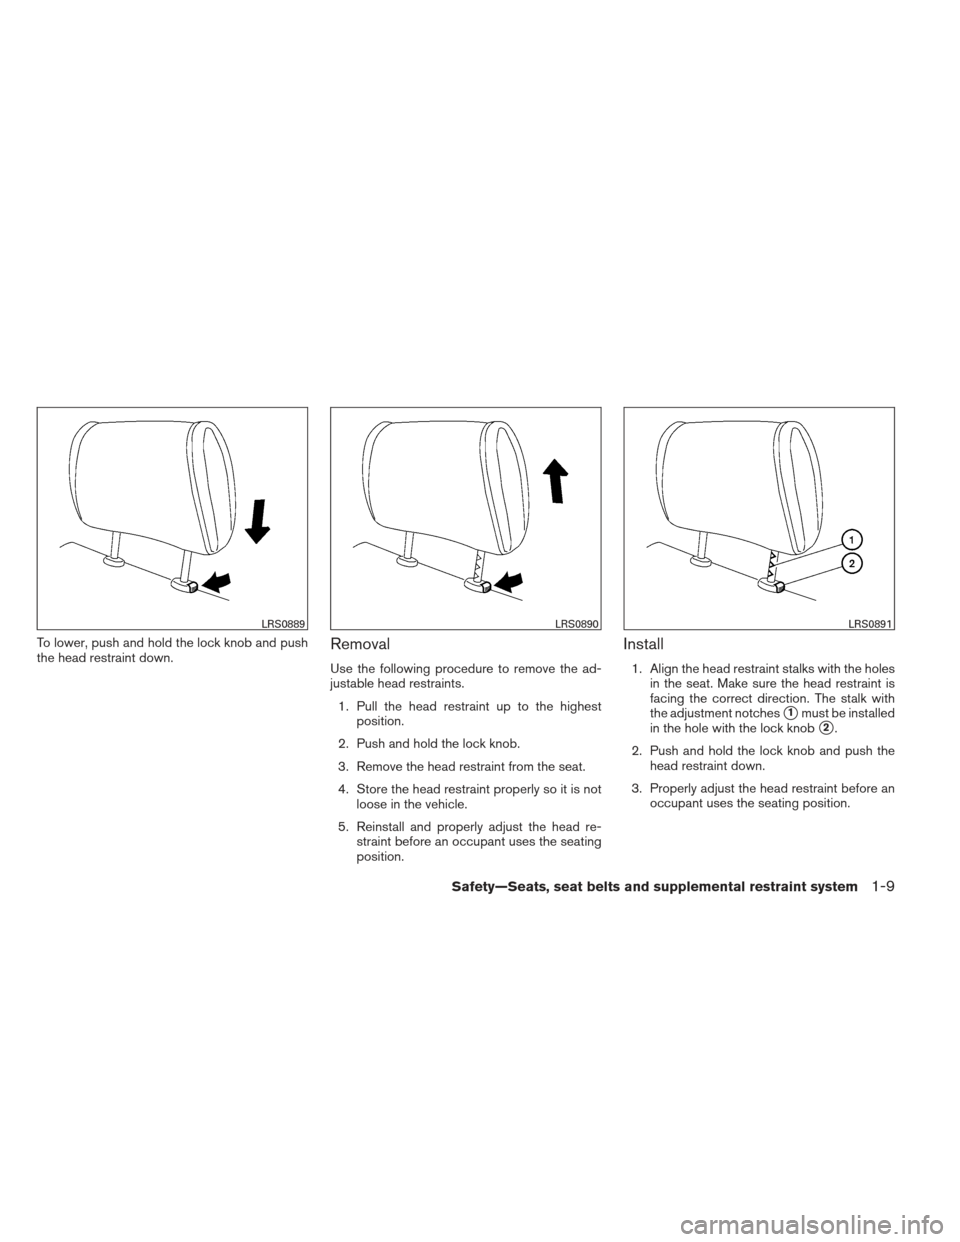 NISSAN MAXIMA 2013 A35 / 7.G Owners Manual To lower, push and hold the lock knob and push
the head restraint down.Removal
Use the following procedure to remove the ad-
justable head restraints.1. Pull the head restraint up to the highest posit